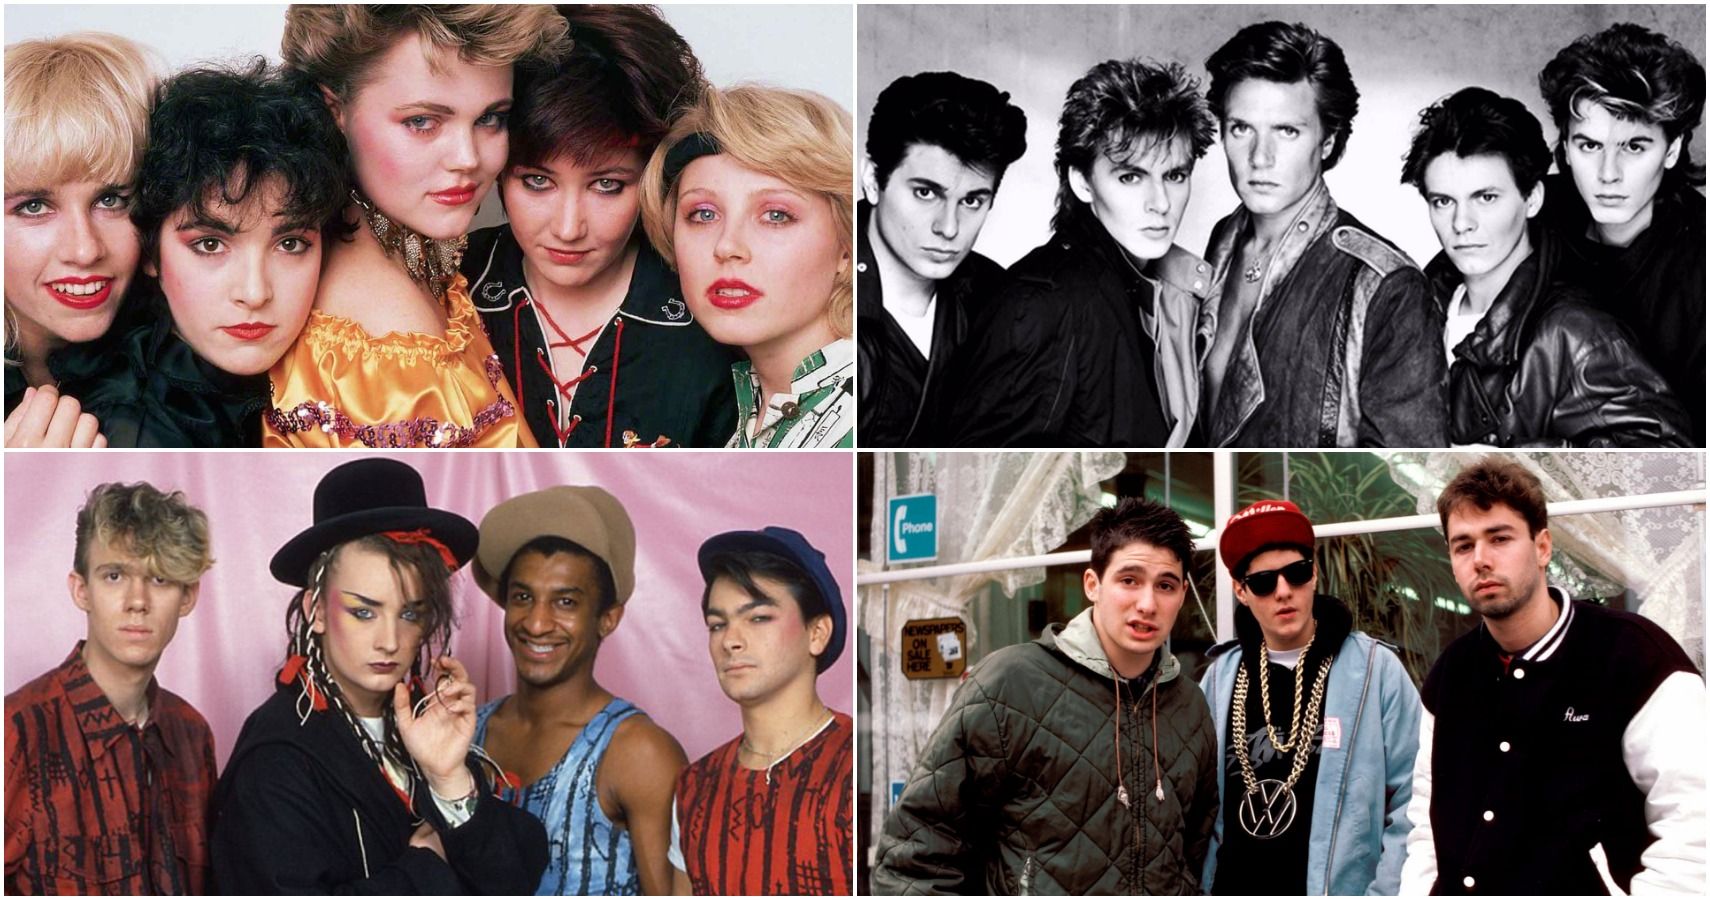 Ten 80s Fashion Trends We'd Rather Forget About